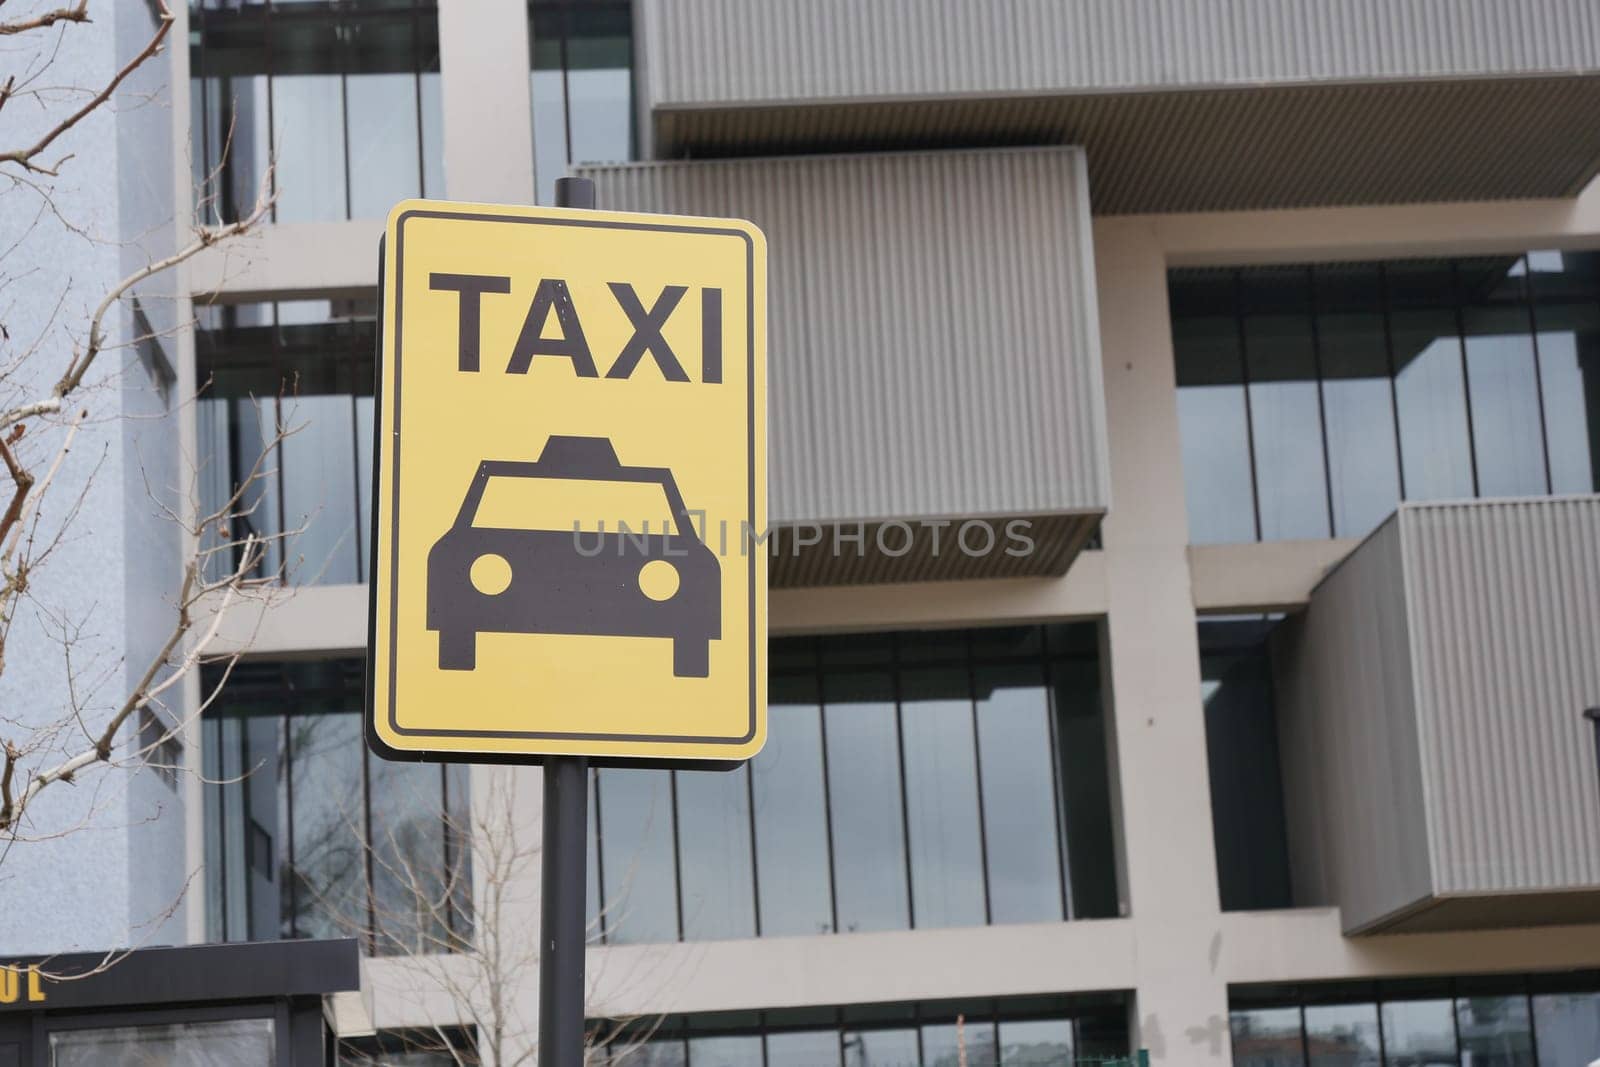 Close-up photo of a yellow Taxi stand sign attached to a metal pole by towfiq007